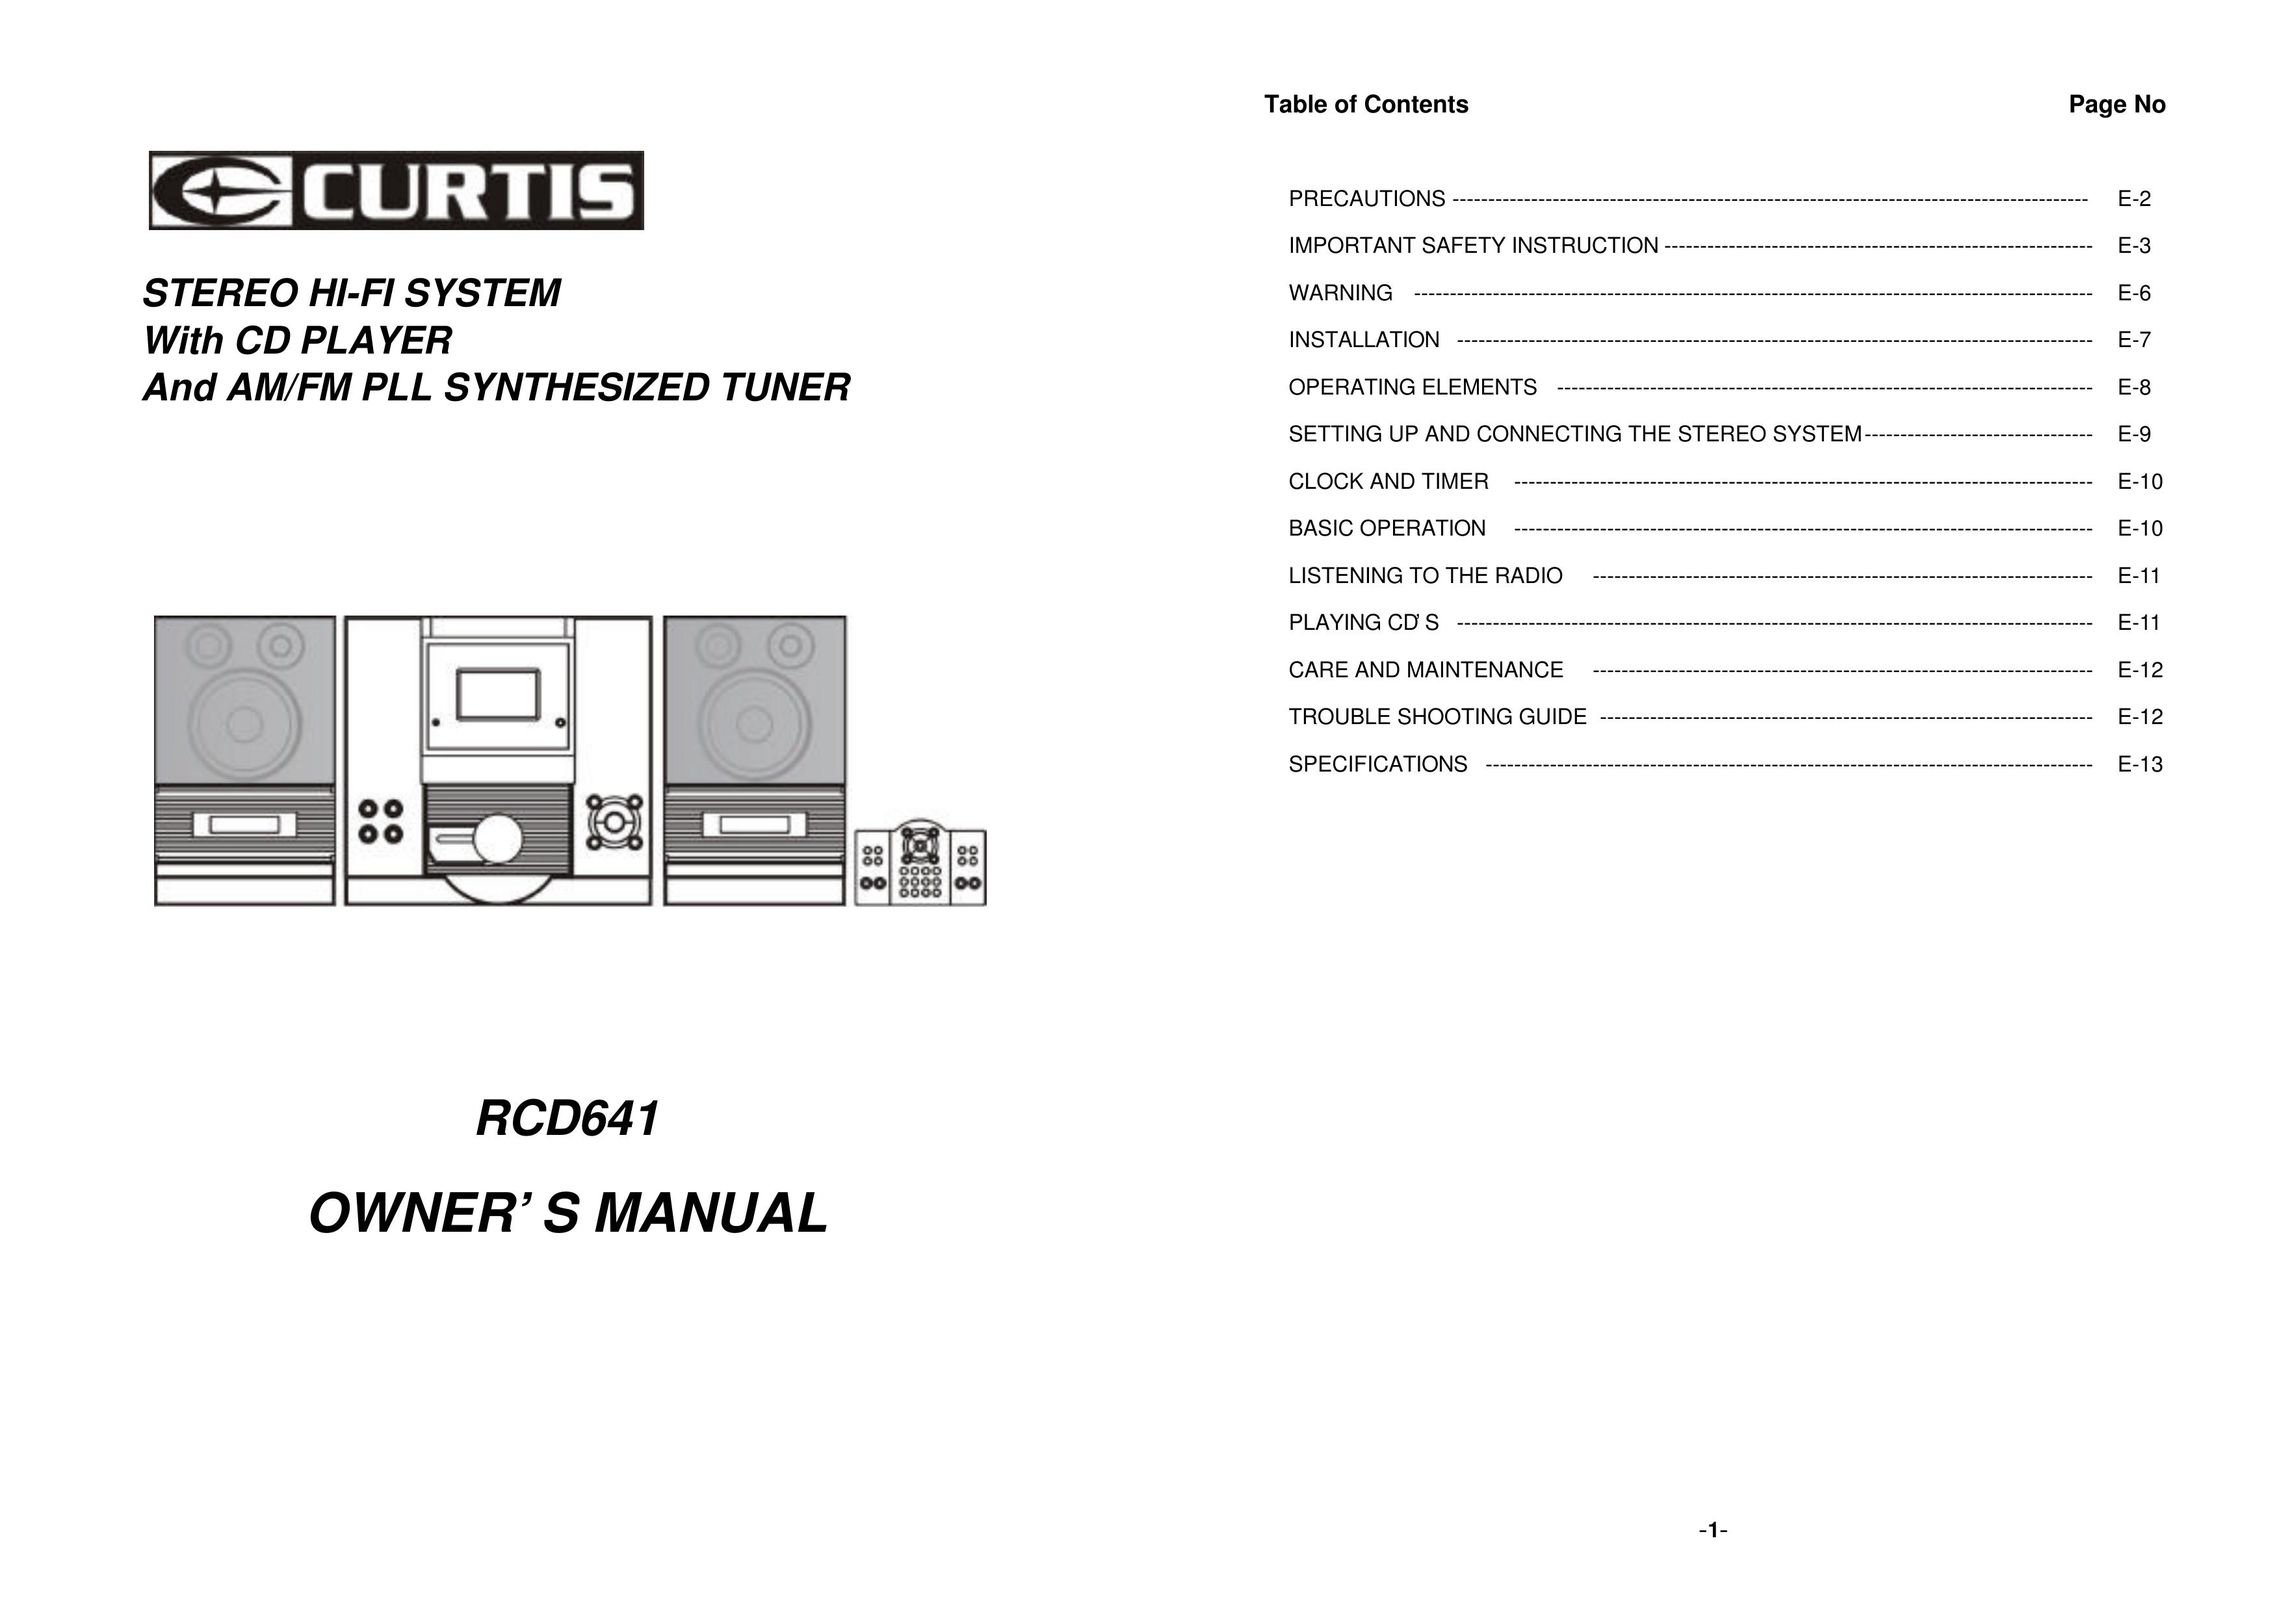 Curtis RCD641 Car Stereo System User Manual